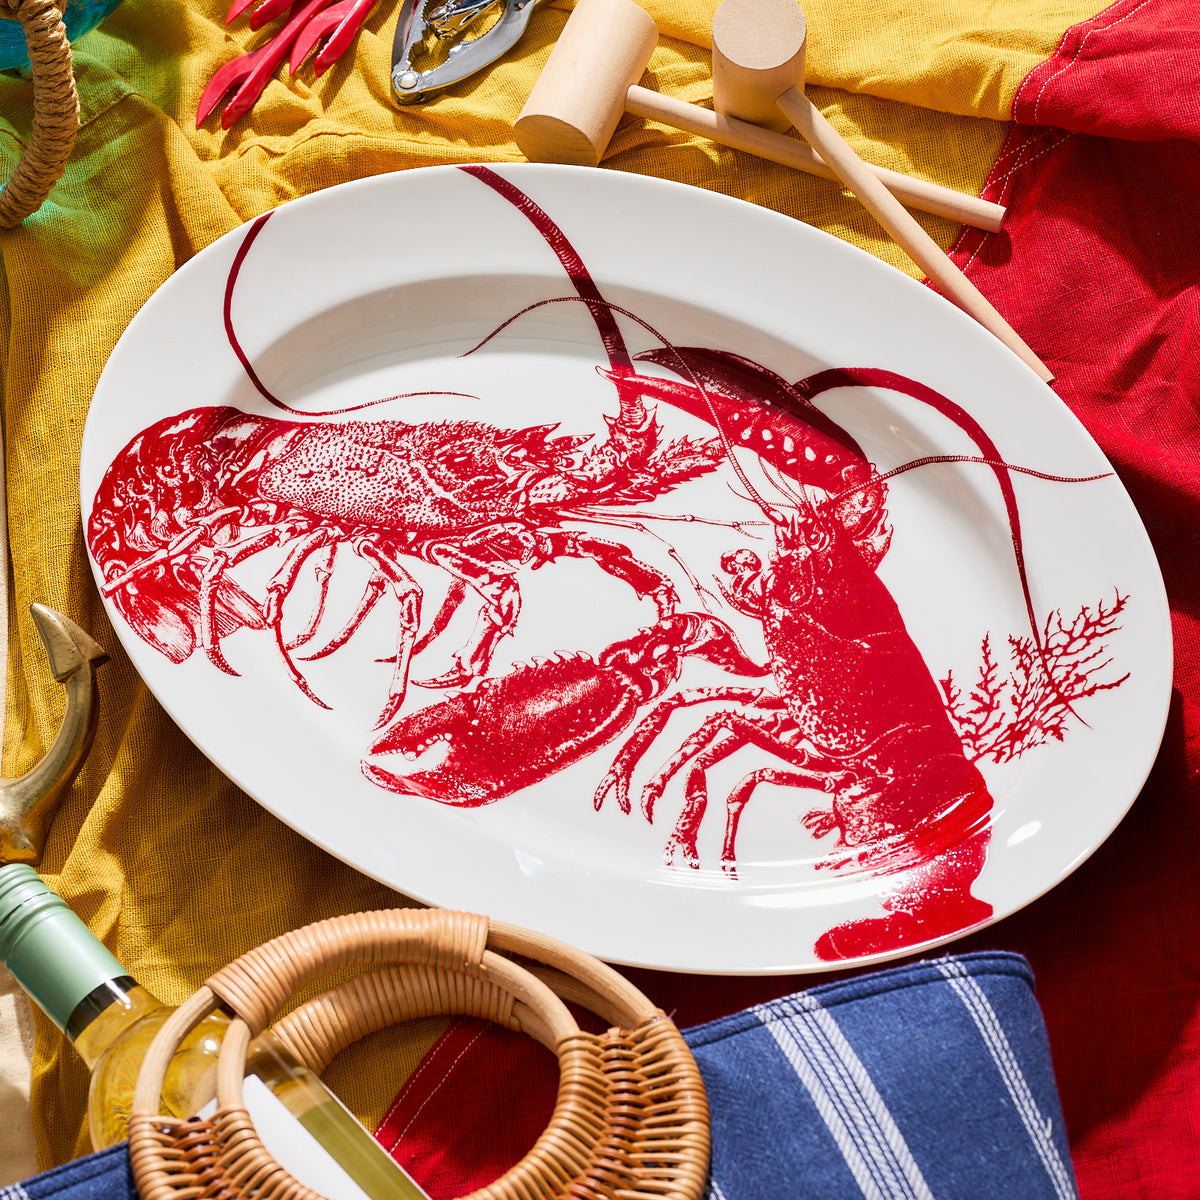 A Lobster Oval Rimmed Platter by Caskata Artisanal Home with red illustrations is surrounded by various kitchen and dining utensils, including wooden mallets, a can opener, and a blue and white striped fabric, evoking a charming seaside style.